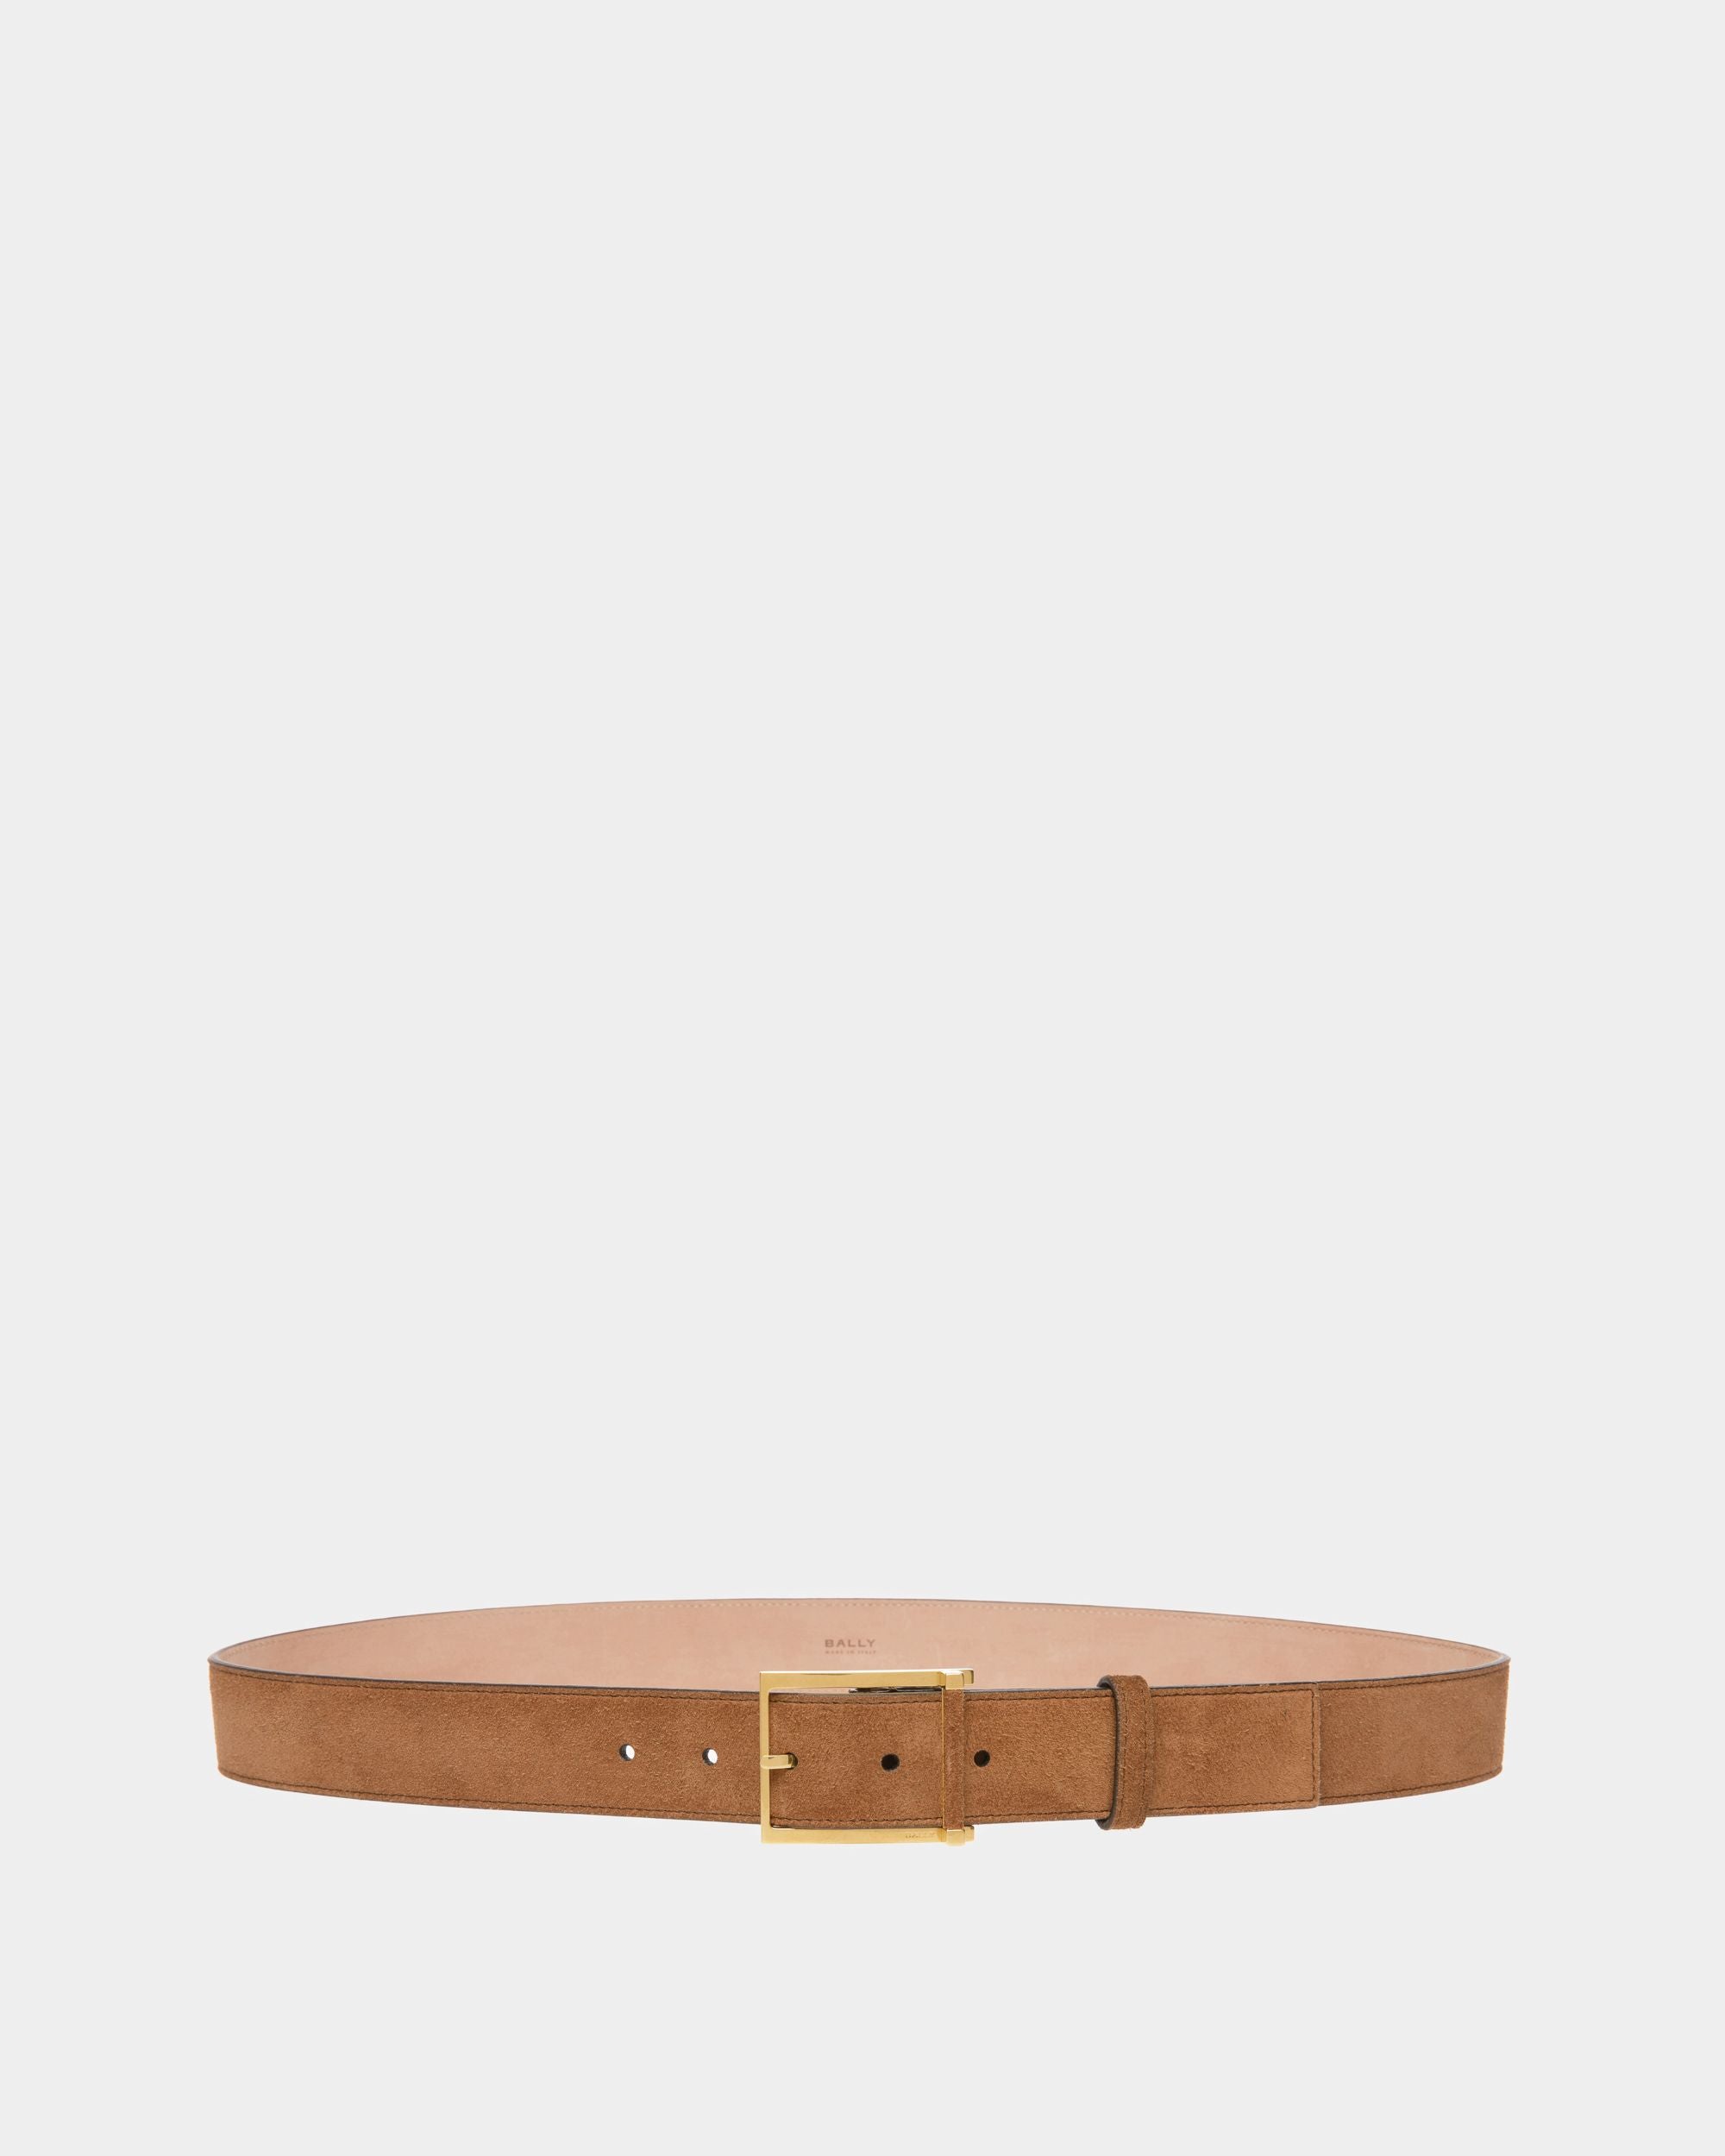 Angle 35 | Men's Fixed Belt | Brown Leather | Bally | Still Life Front